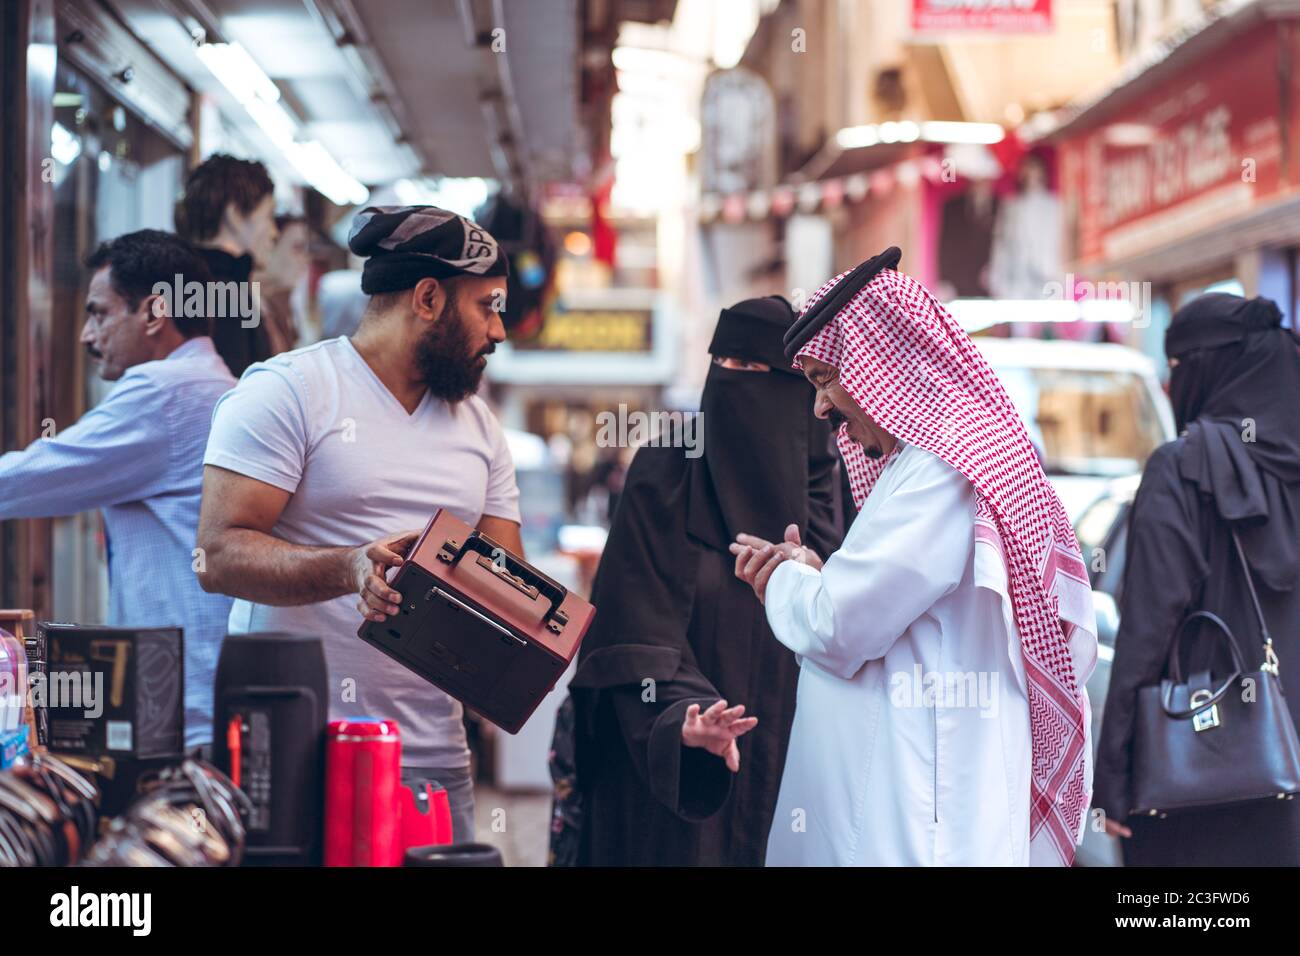 Manama / Bahrain - January 10, 2020: Local Muslim people wearing traditional clothes shopping in Manama Souq, also a famous tourist destination in the capital of Bahrain Stock Photo